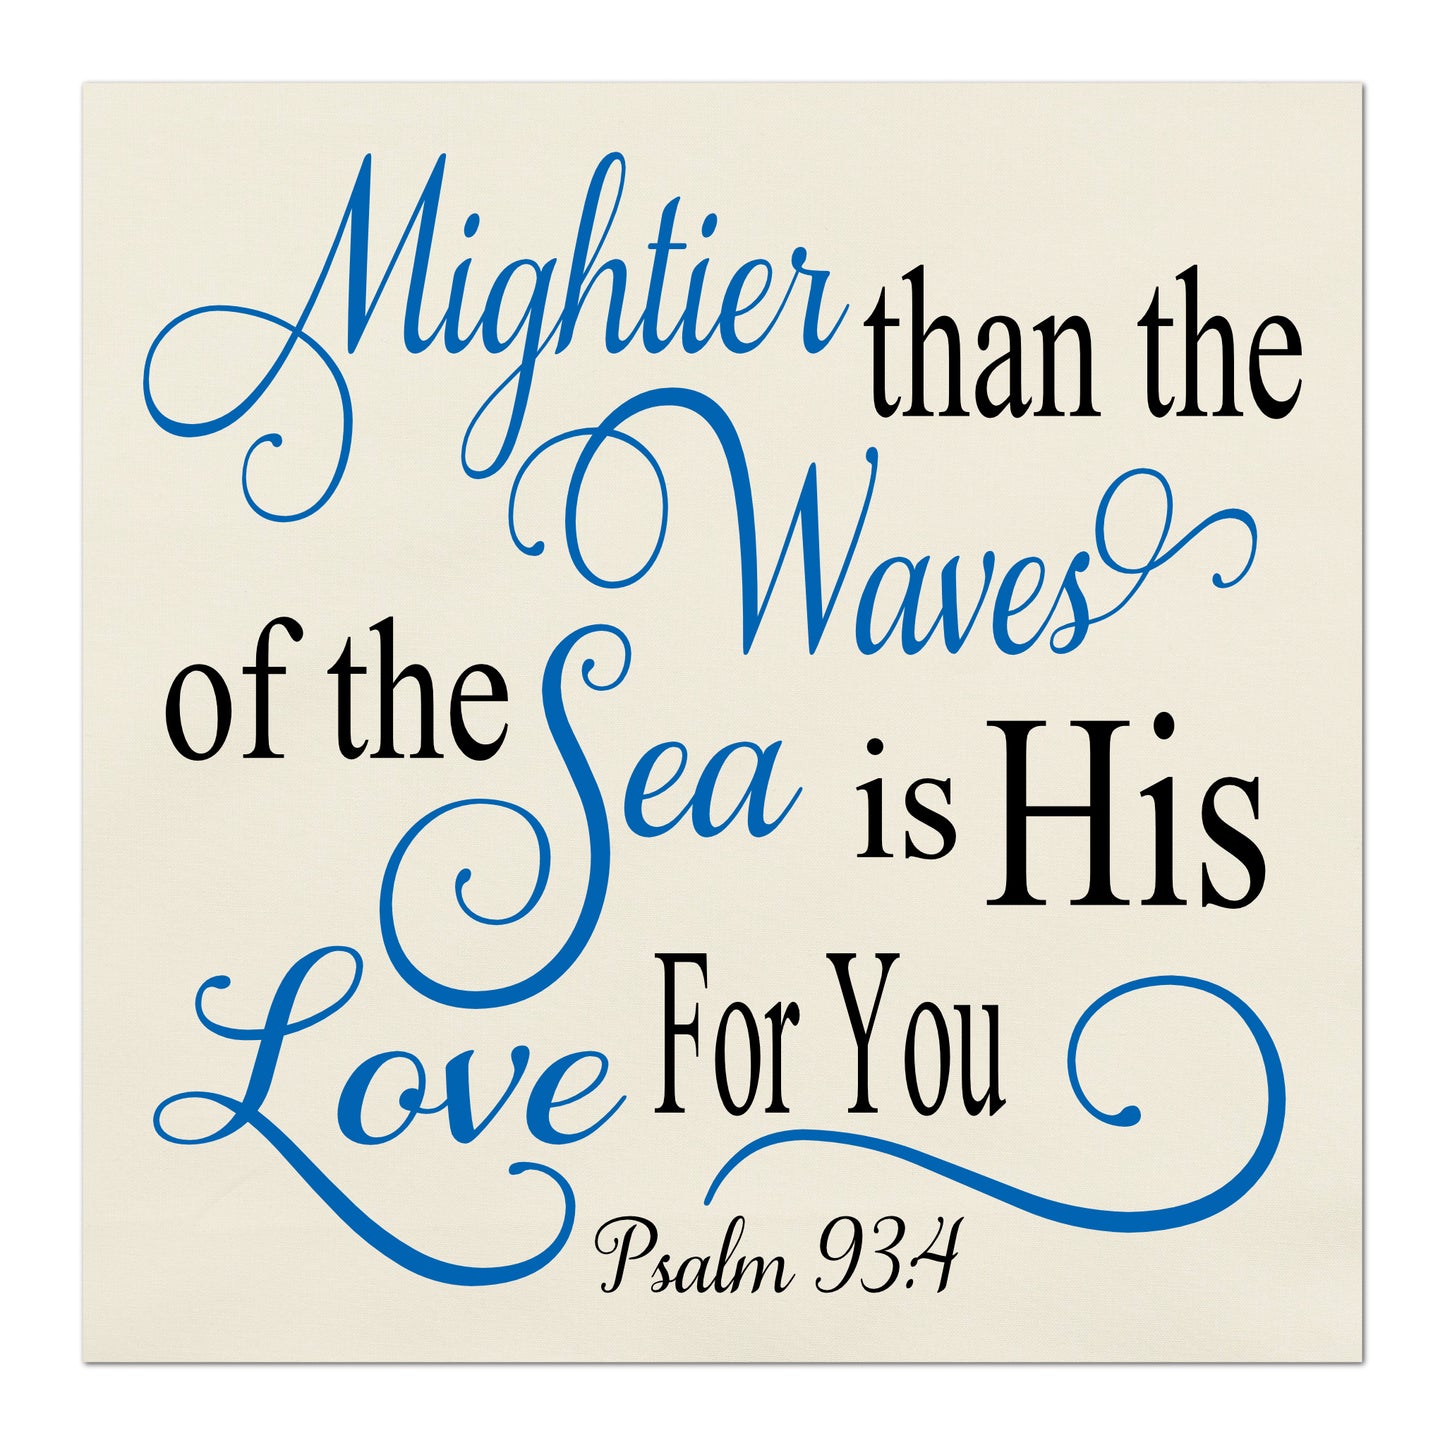 Mightier than the waves of the sea is His love for you - Psalm 93:4 - Fabric Panel Print, Quilting Fabric